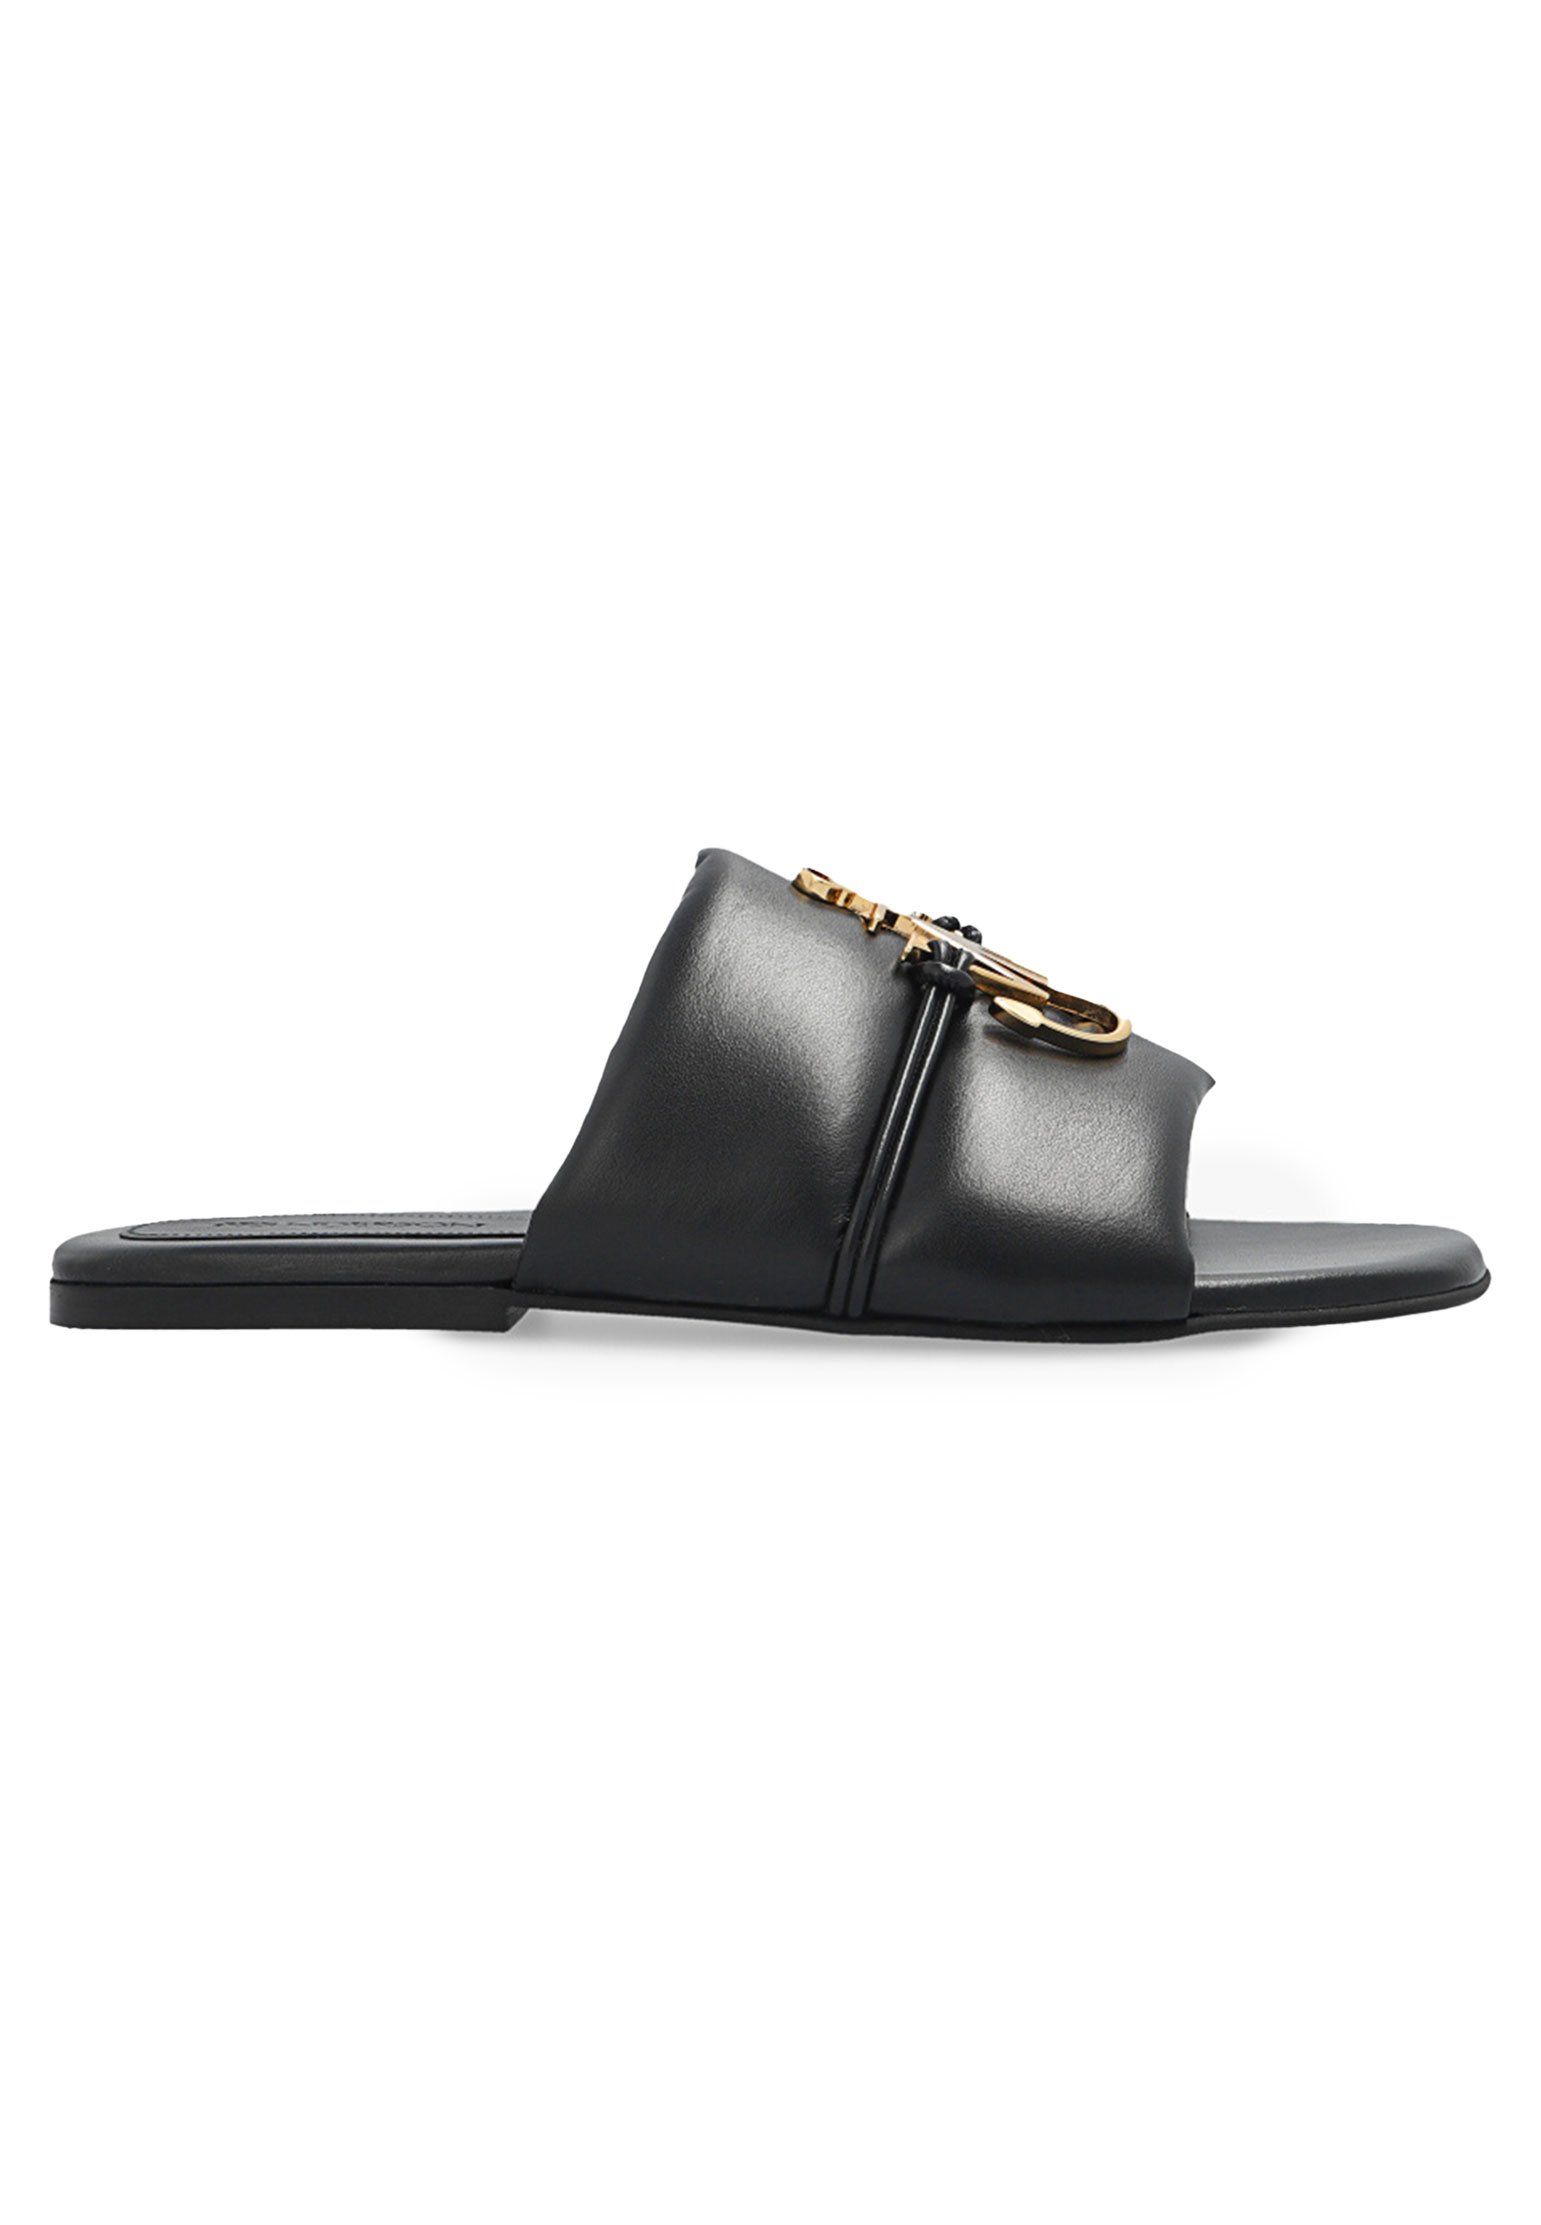 Slippers J.W. ANDERSON Color: black (Code: 1354) in online store Allure